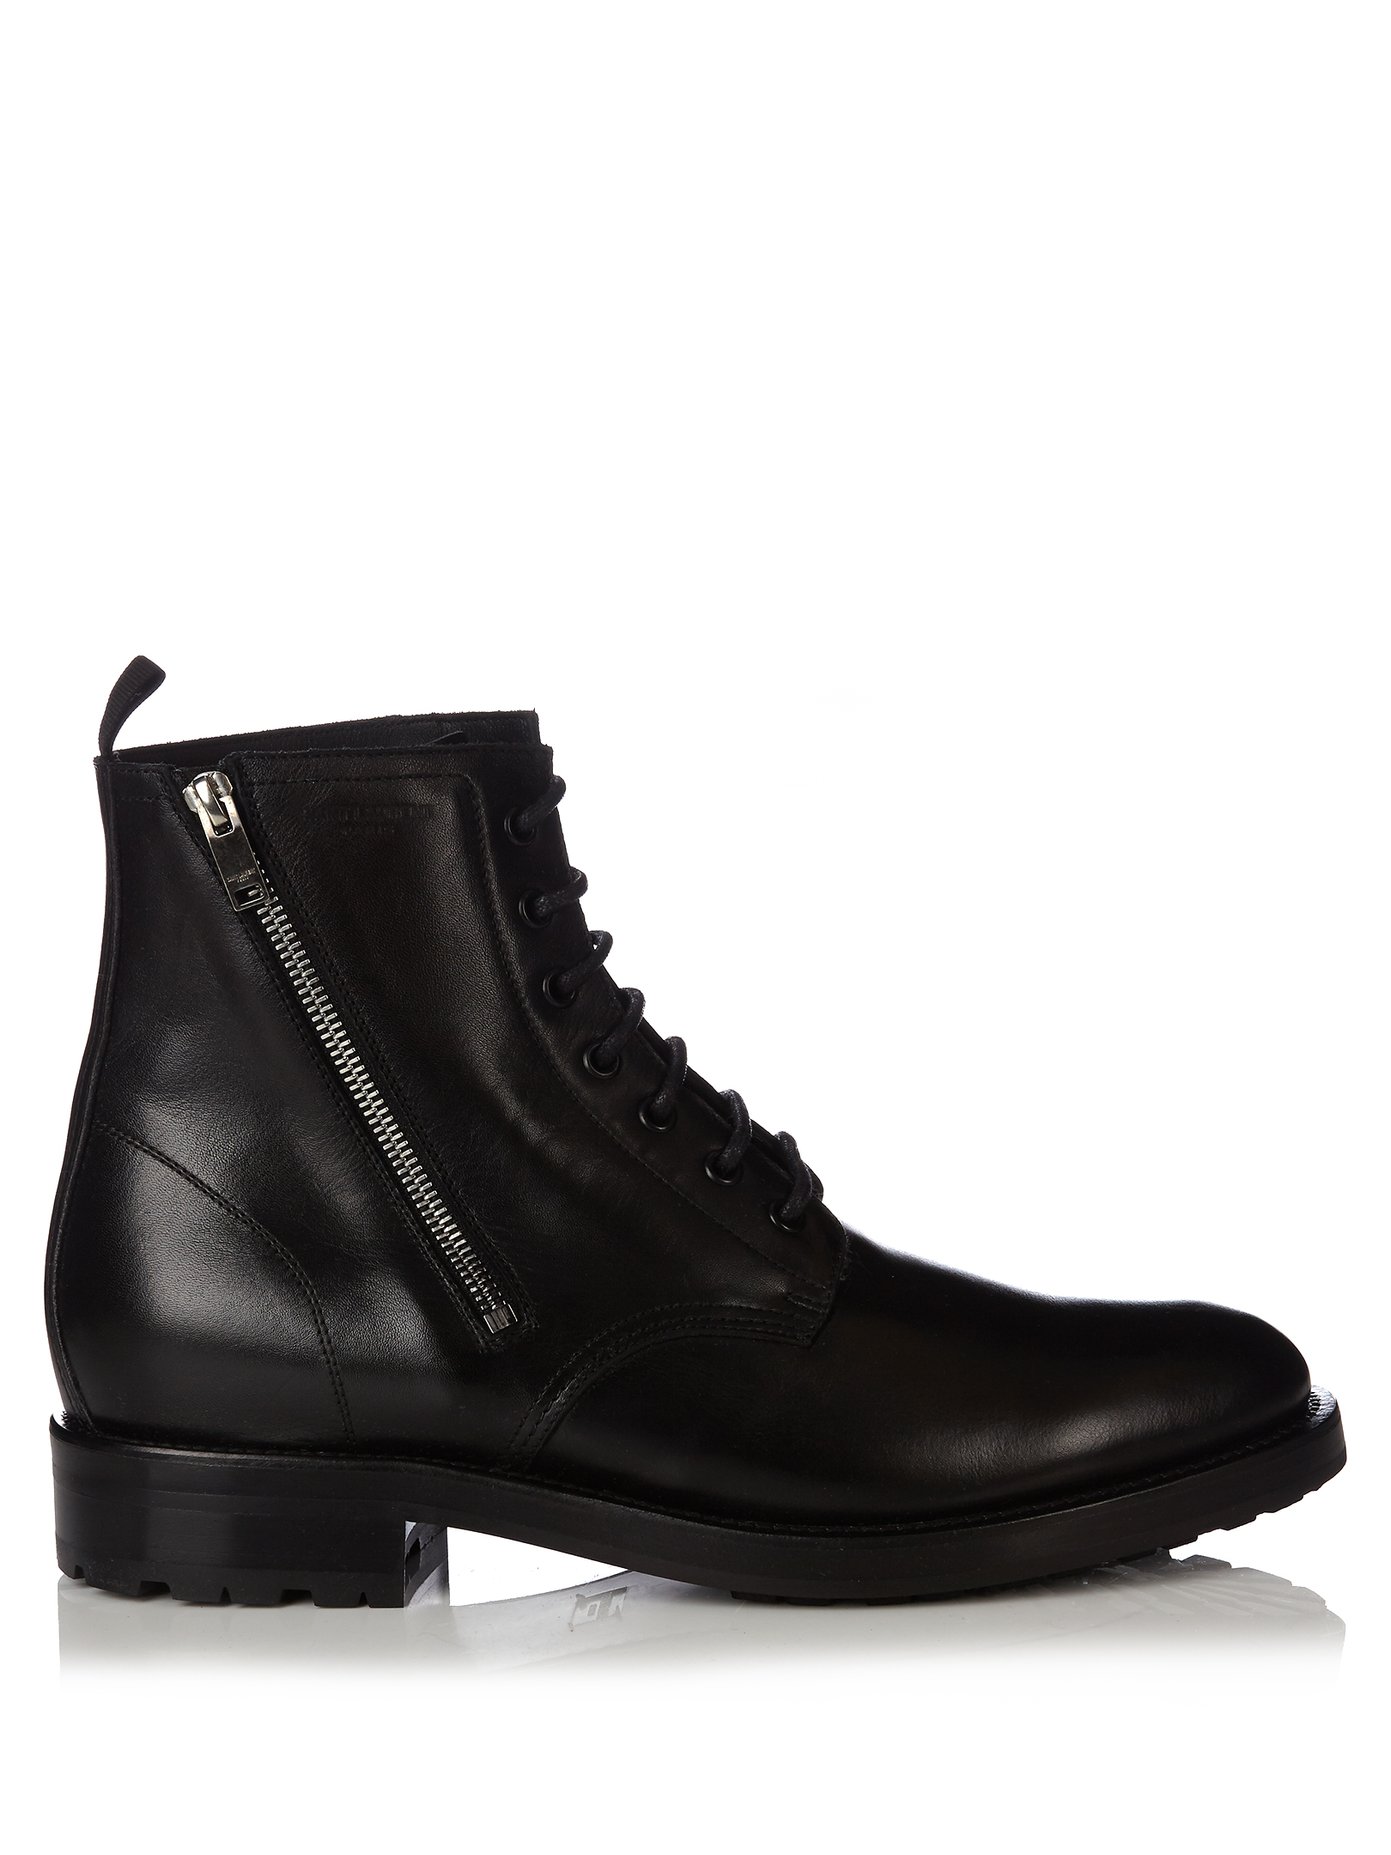 Rangers leather ankle boots | Saint 